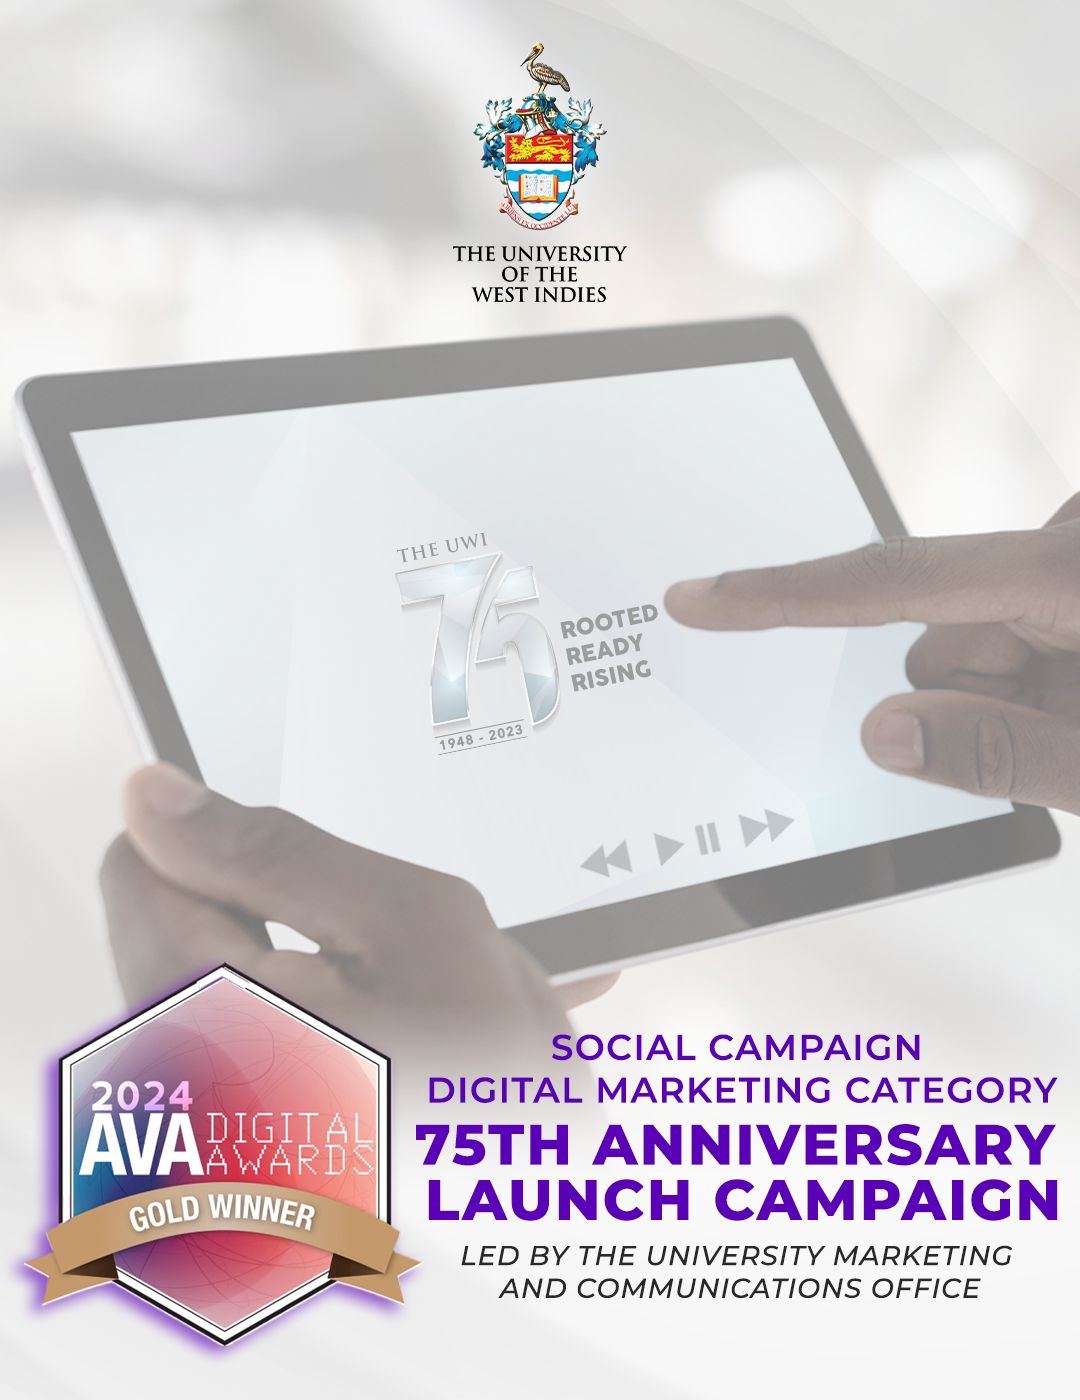 UWI wins gold digital marketing award for its 75th anniversary launch campaign